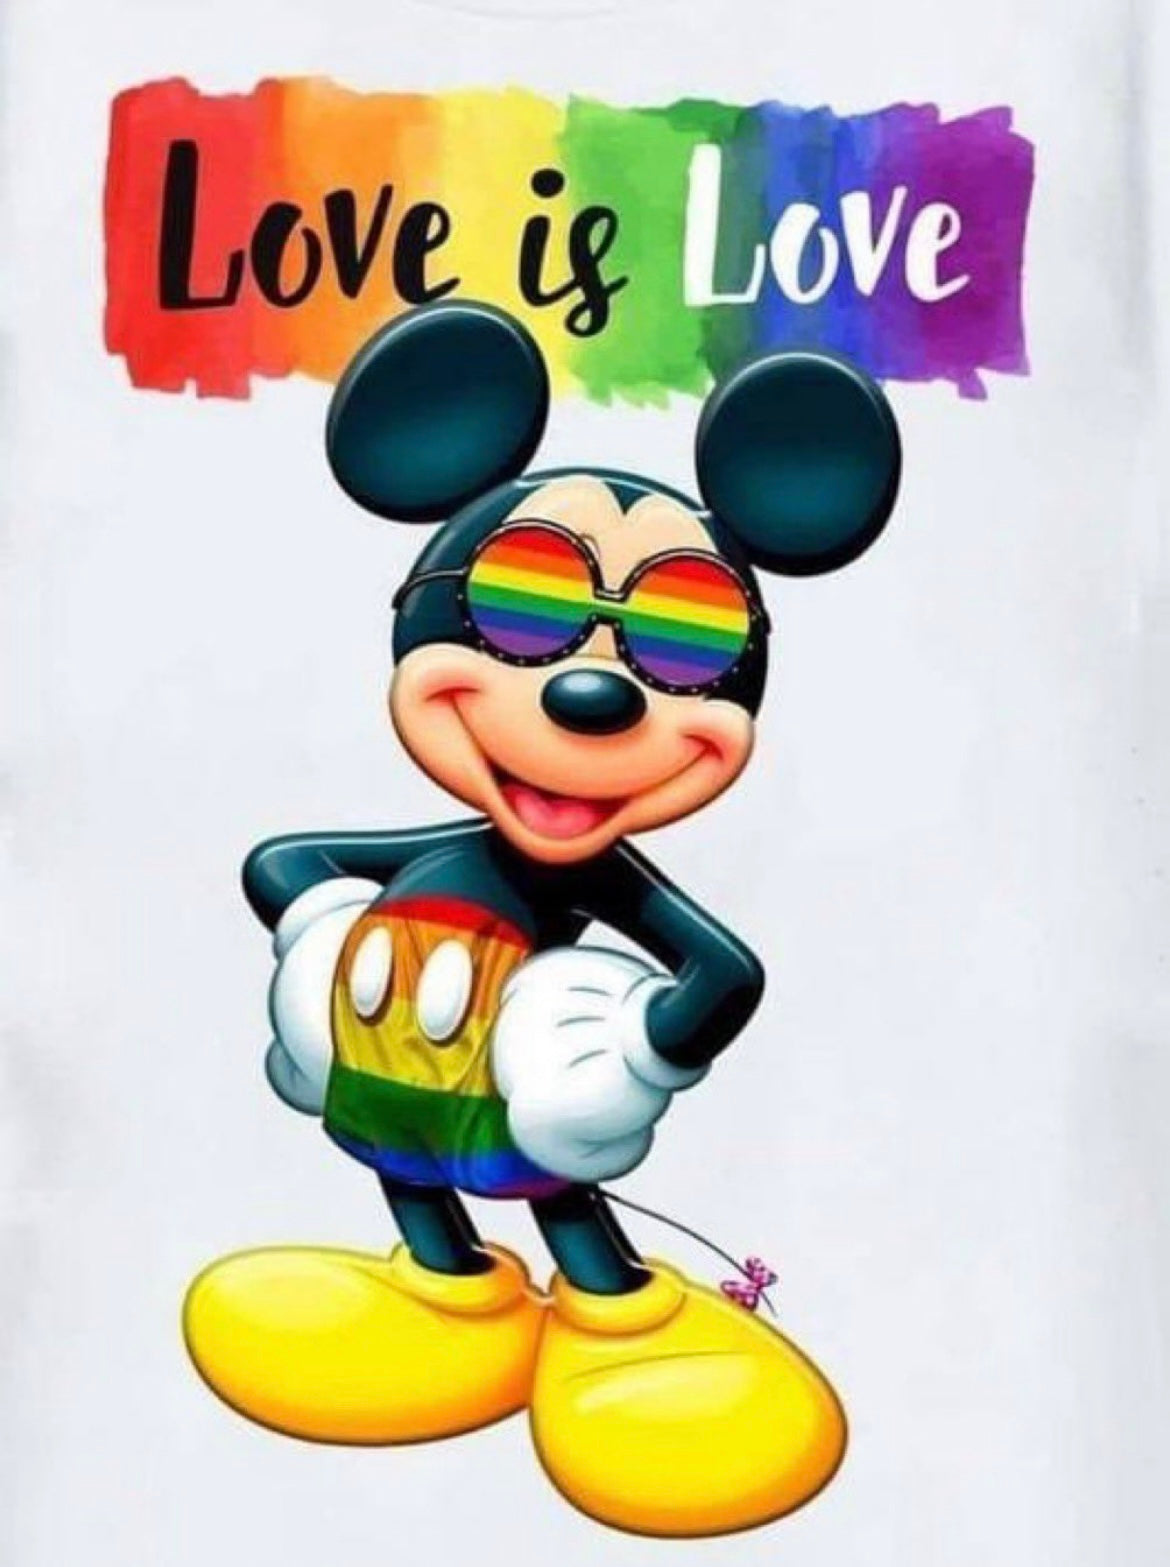 Love is Love is the design that says it all.